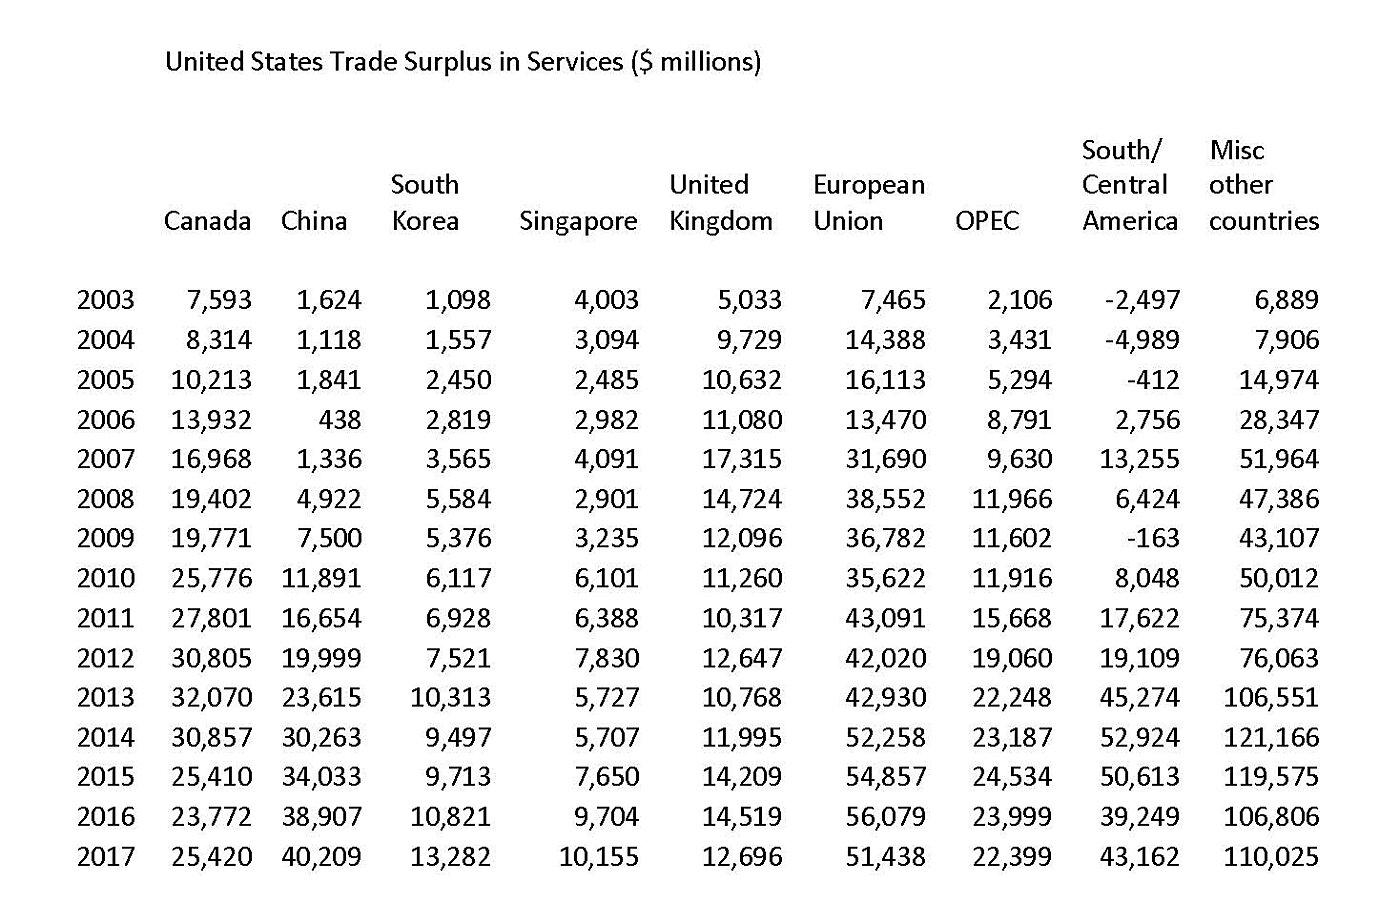 Trade Surpluses in Services, in millions